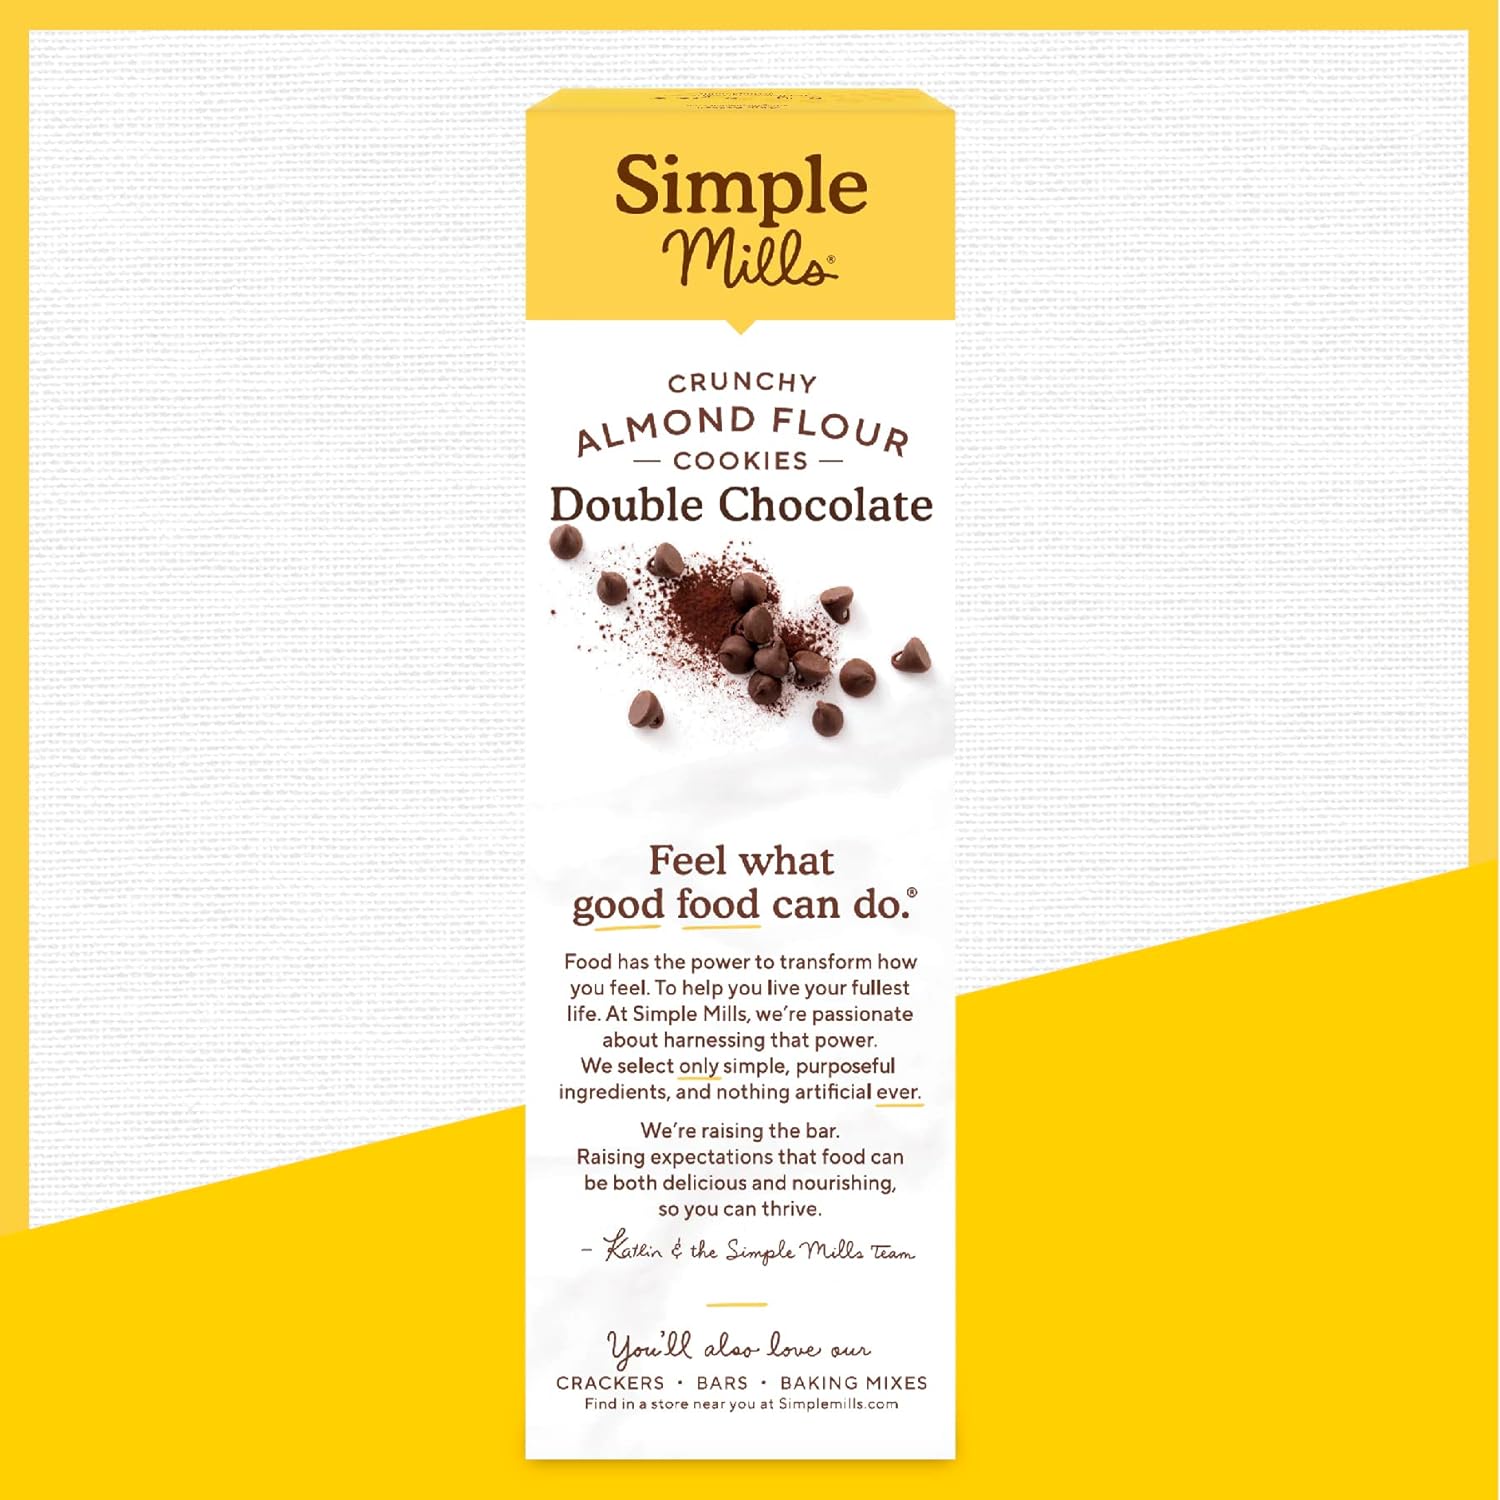 Simple Mills Almond Flour Crunchy Cookies, Double Chocolate Chip - Gluten Free, Vegan, Healthy Snacks, Made with Organic Coconut Oil, 5.5 Ounce (Pack of 3) : Grocery & Gourmet Food